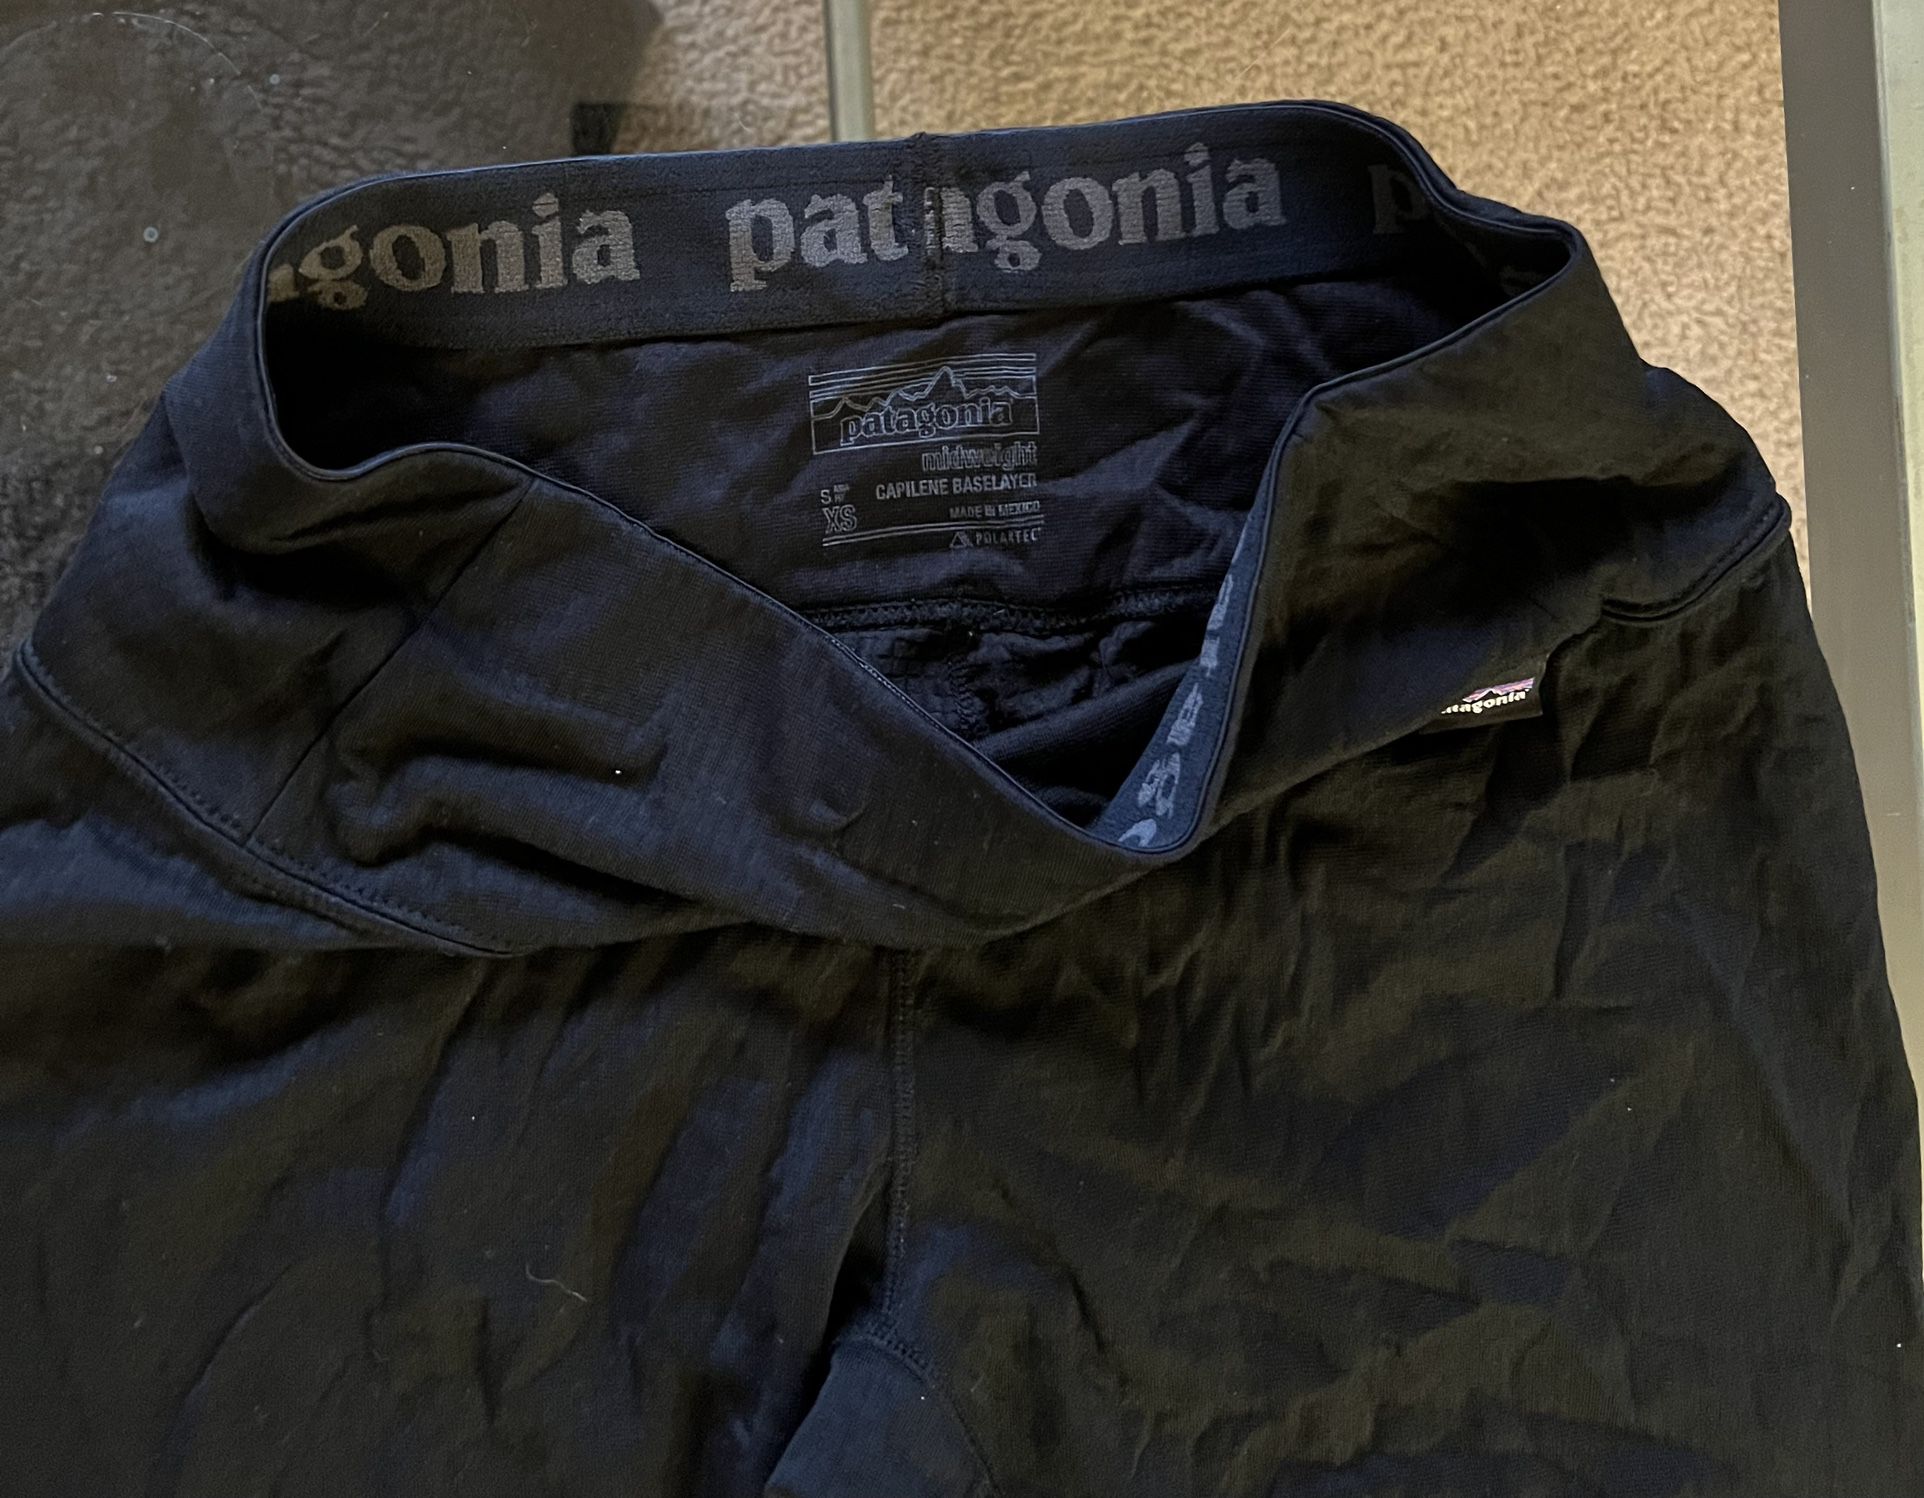 Patagonia leggings for women size xs in perfect condition